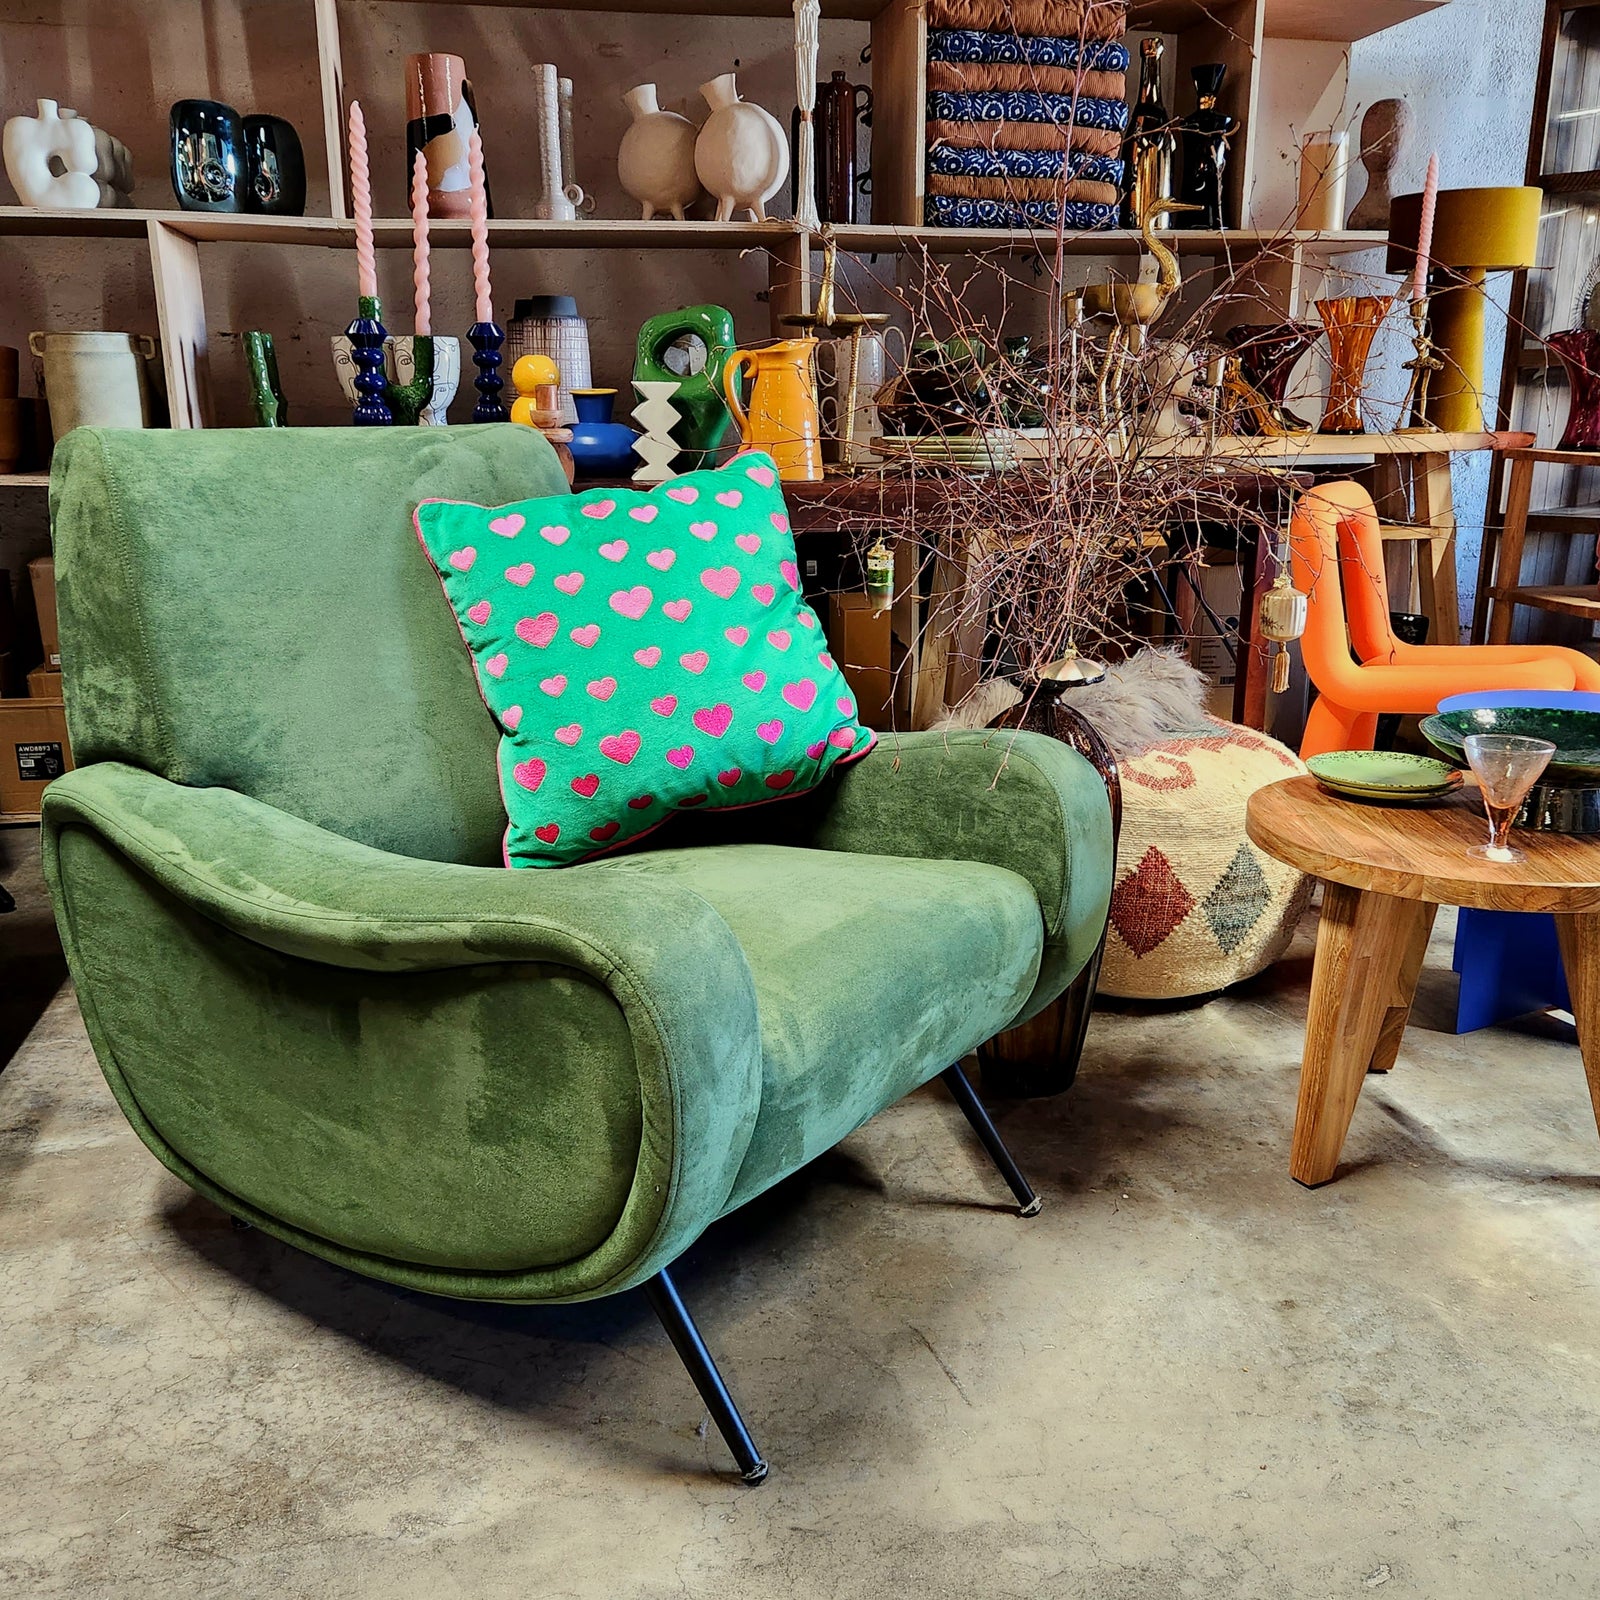 Lady Armchair Green Suede